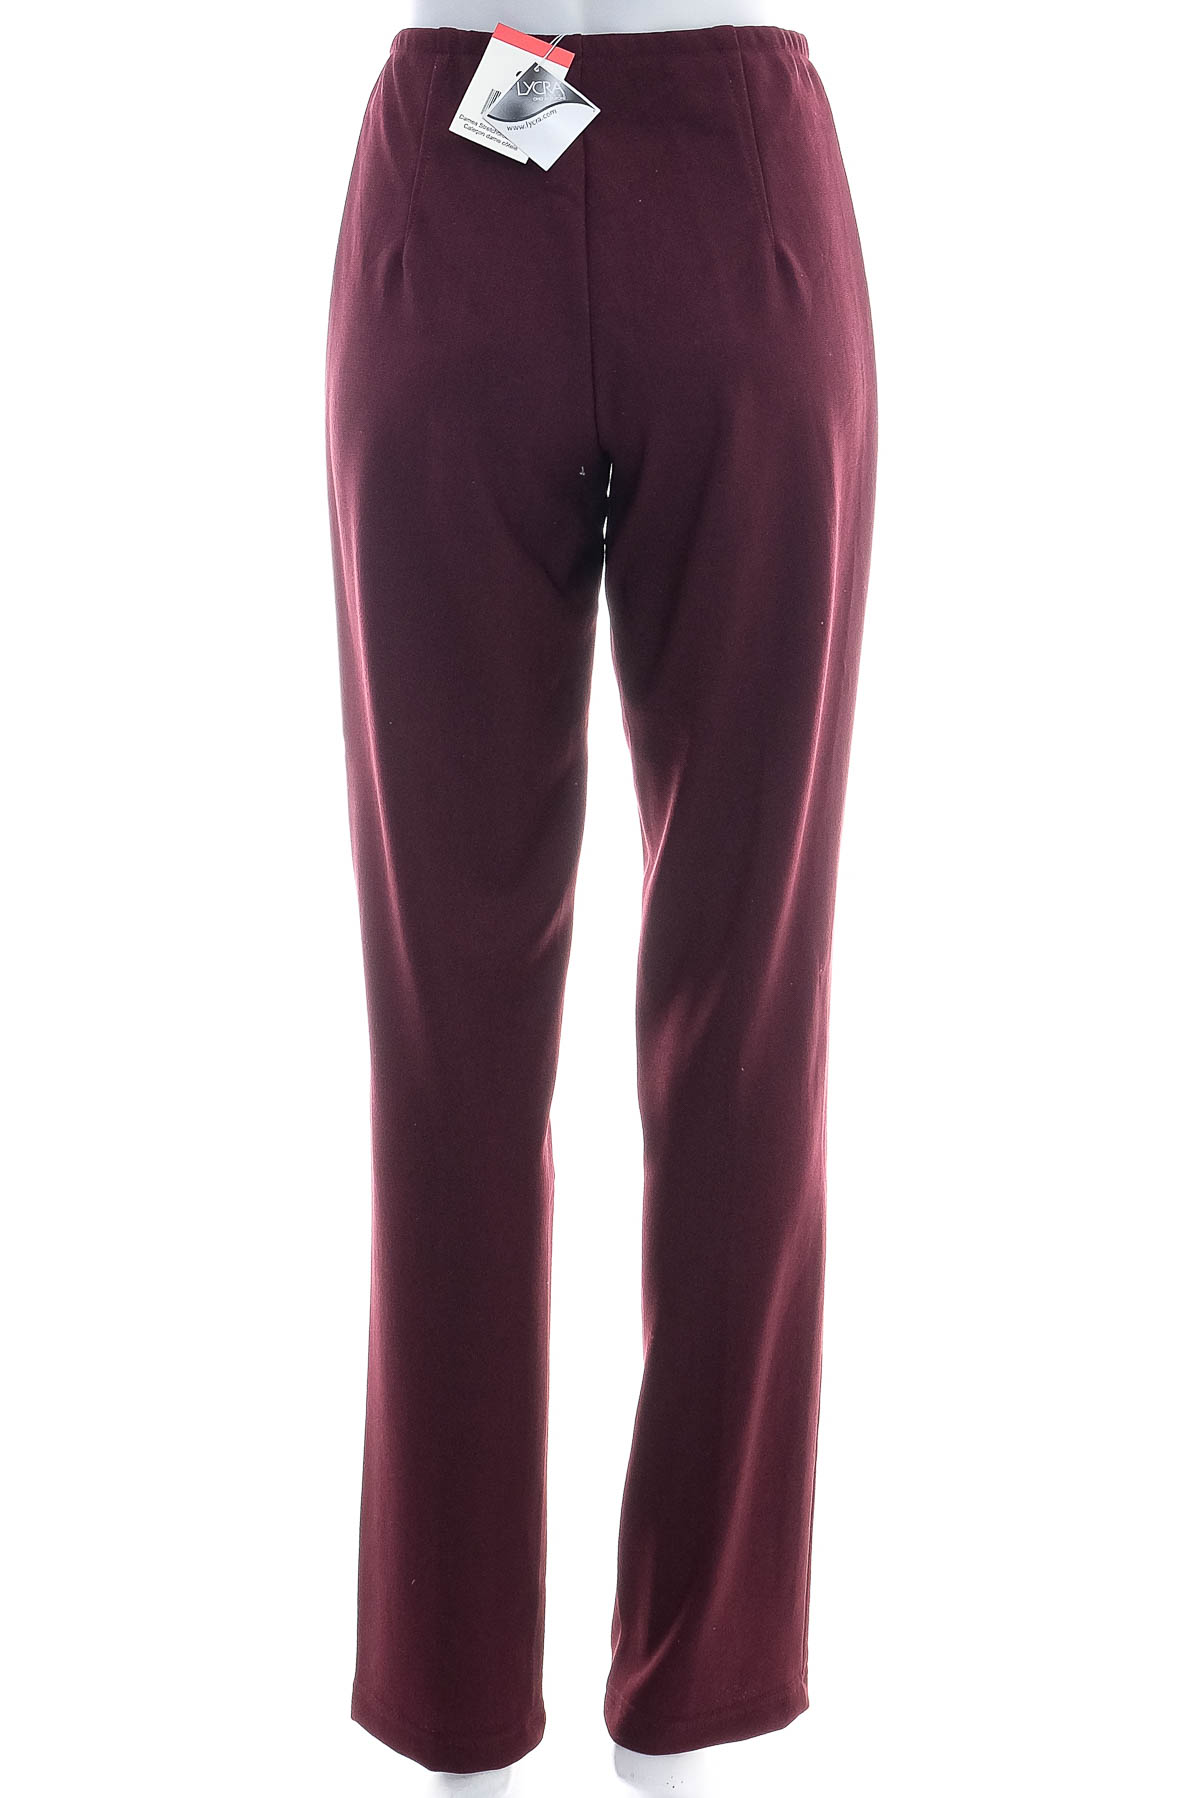 Women's trousers - Courtly - 1